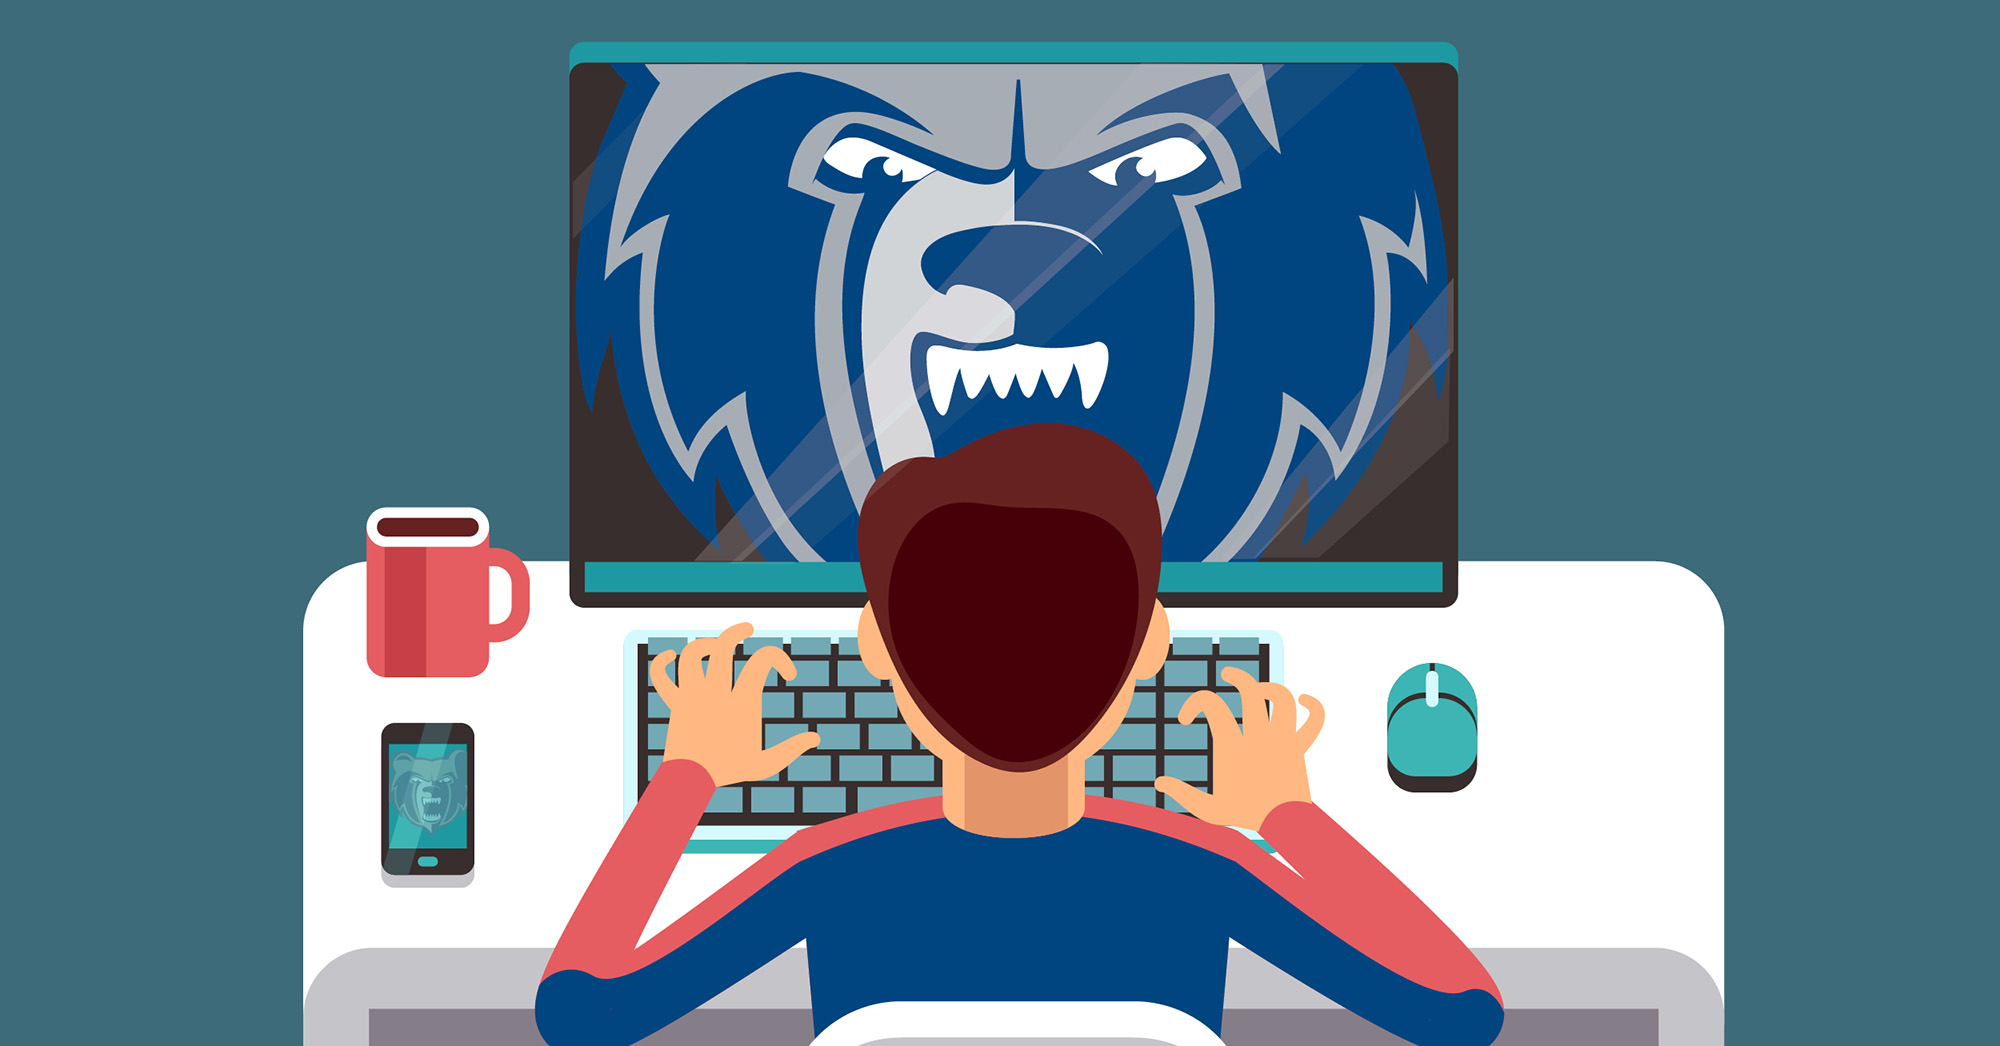 Illustration of a student working on a computer with a Bruin logo on the screen.